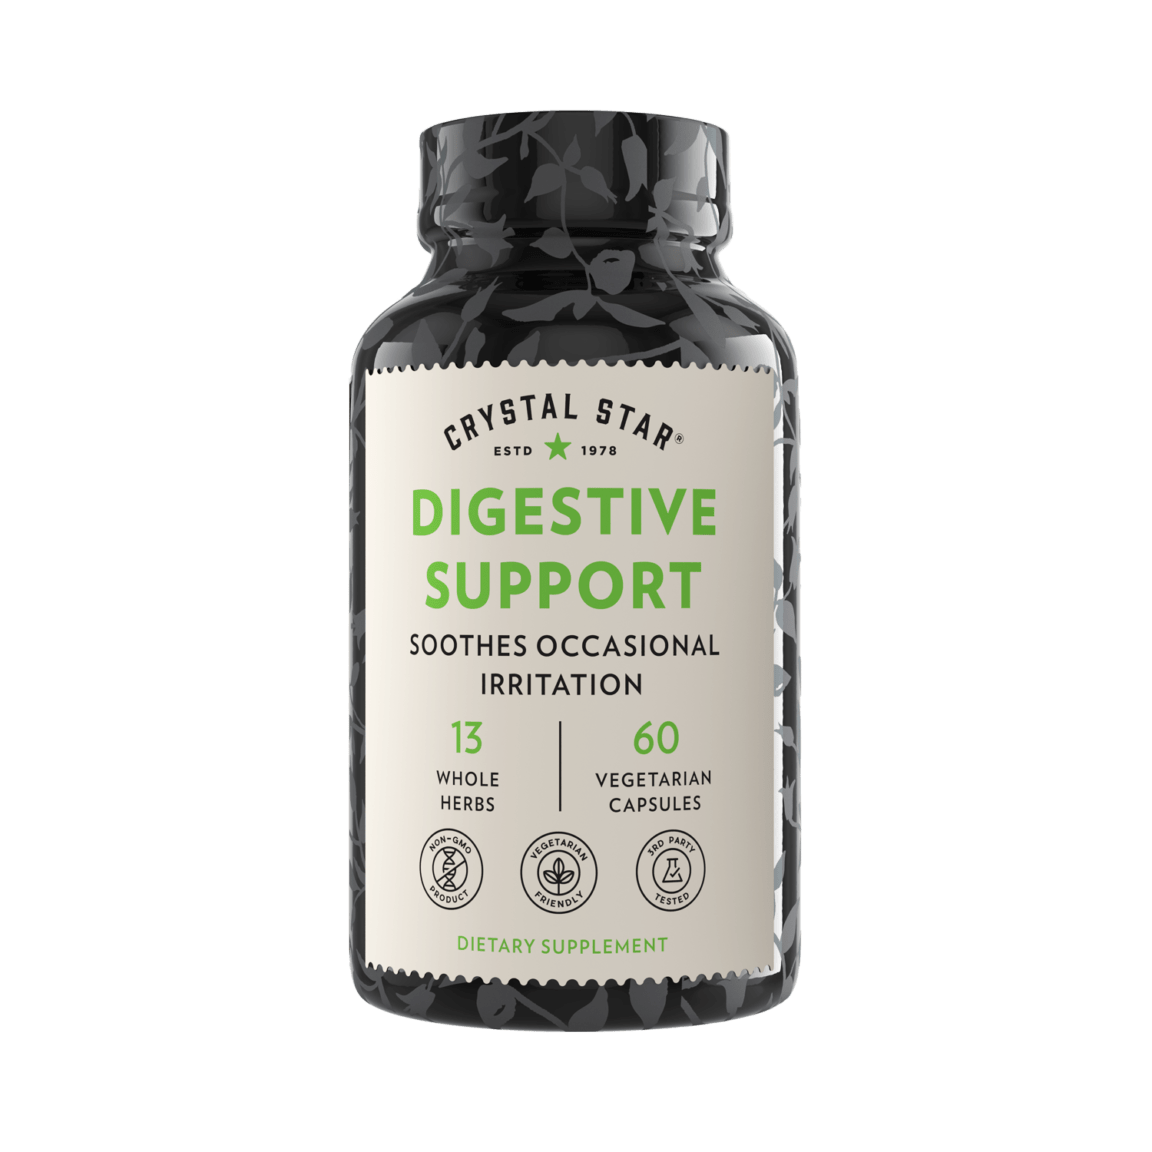 Digestive Support by Crystal Star